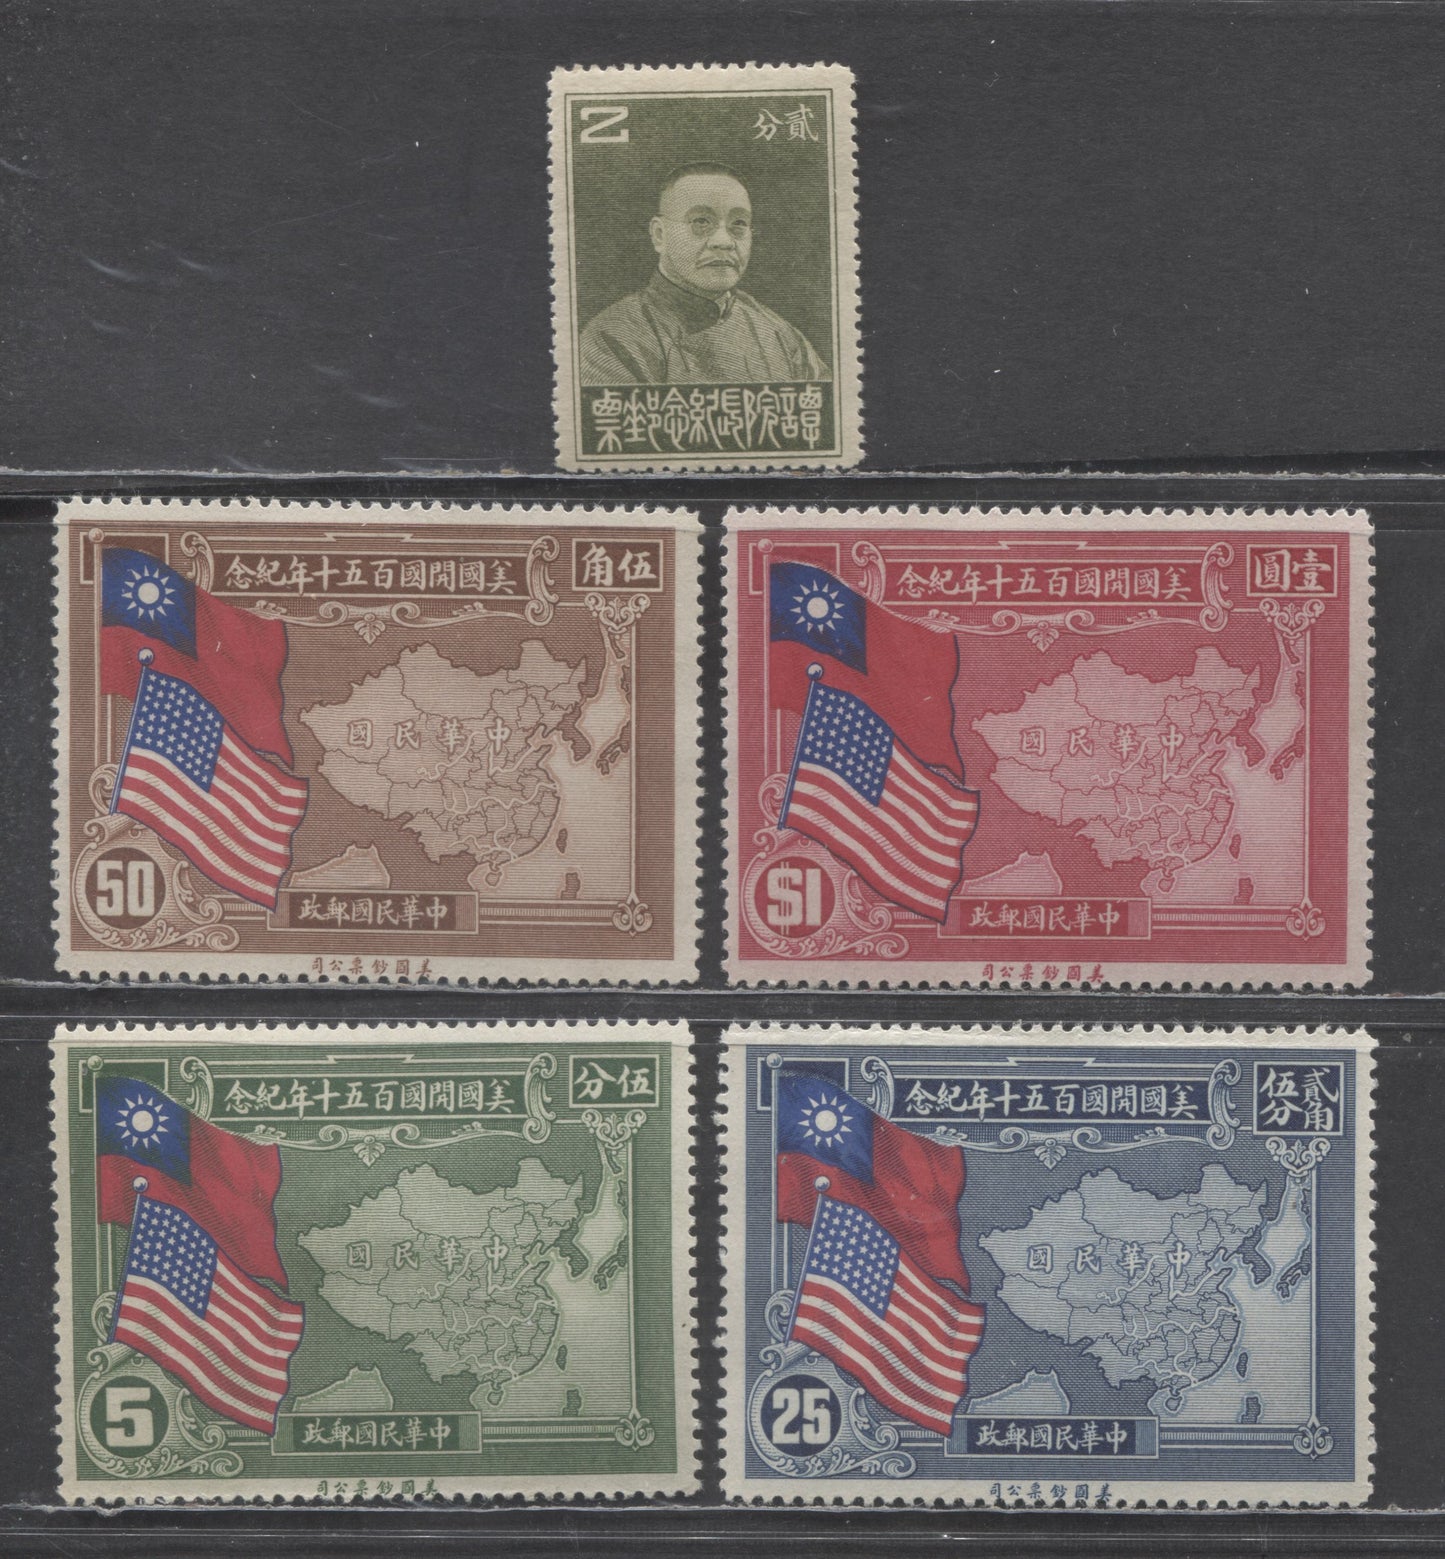 Lot 384 China SC#326/367 1933-1939 Tan Yan Kai - 150th Anniversary Of US Constitution Issues, 5 VFOG Singles, Click on Listing to See ALL Pictures, 2022 Scott Classic Cat. $17